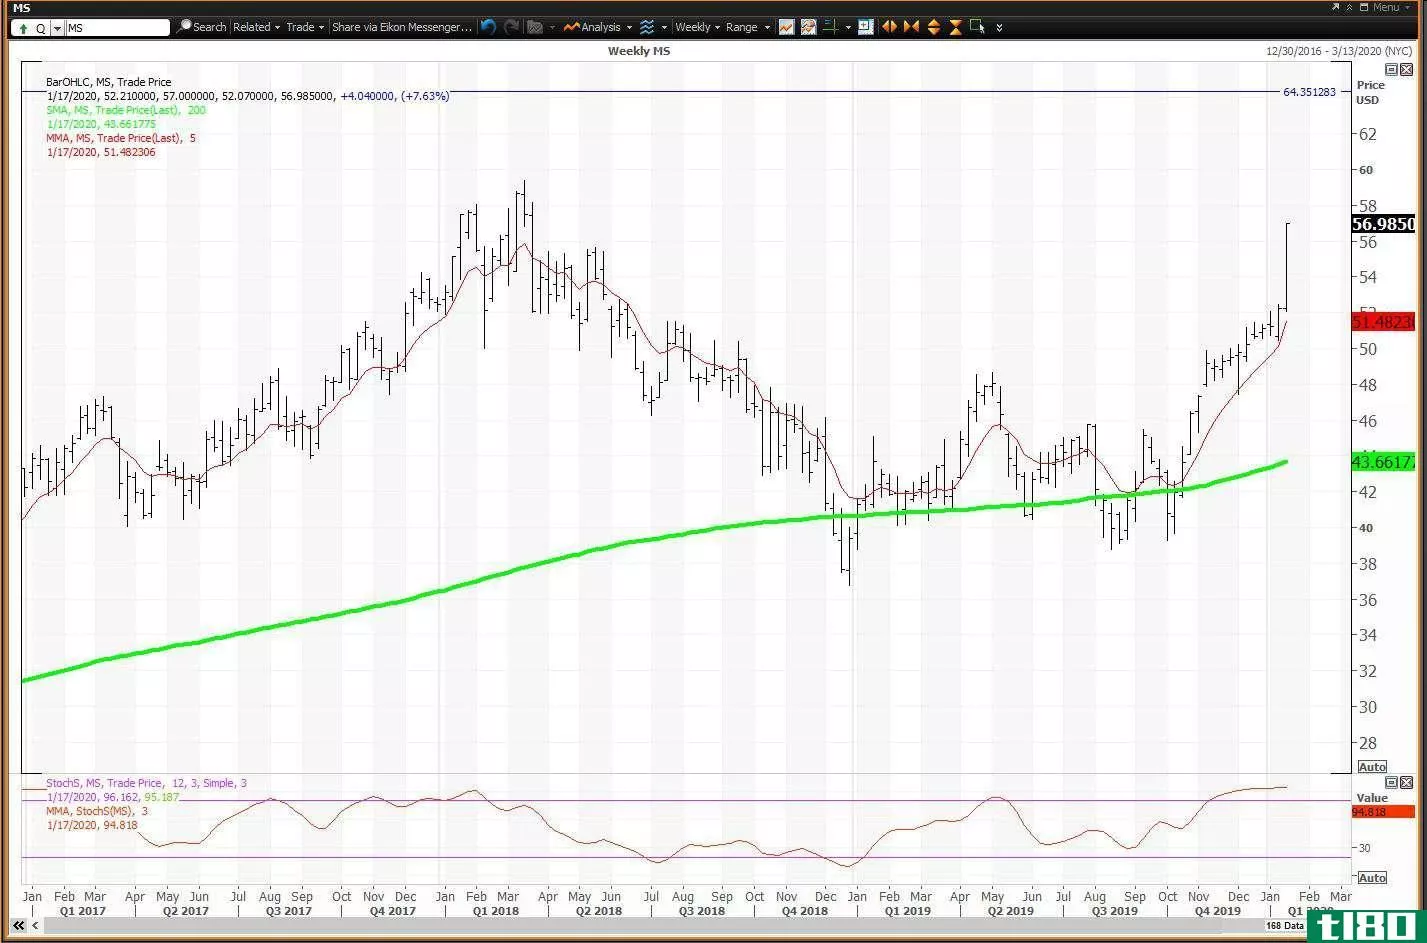 Weekly chart showing the share price performance of Morgan Stanley (MS)